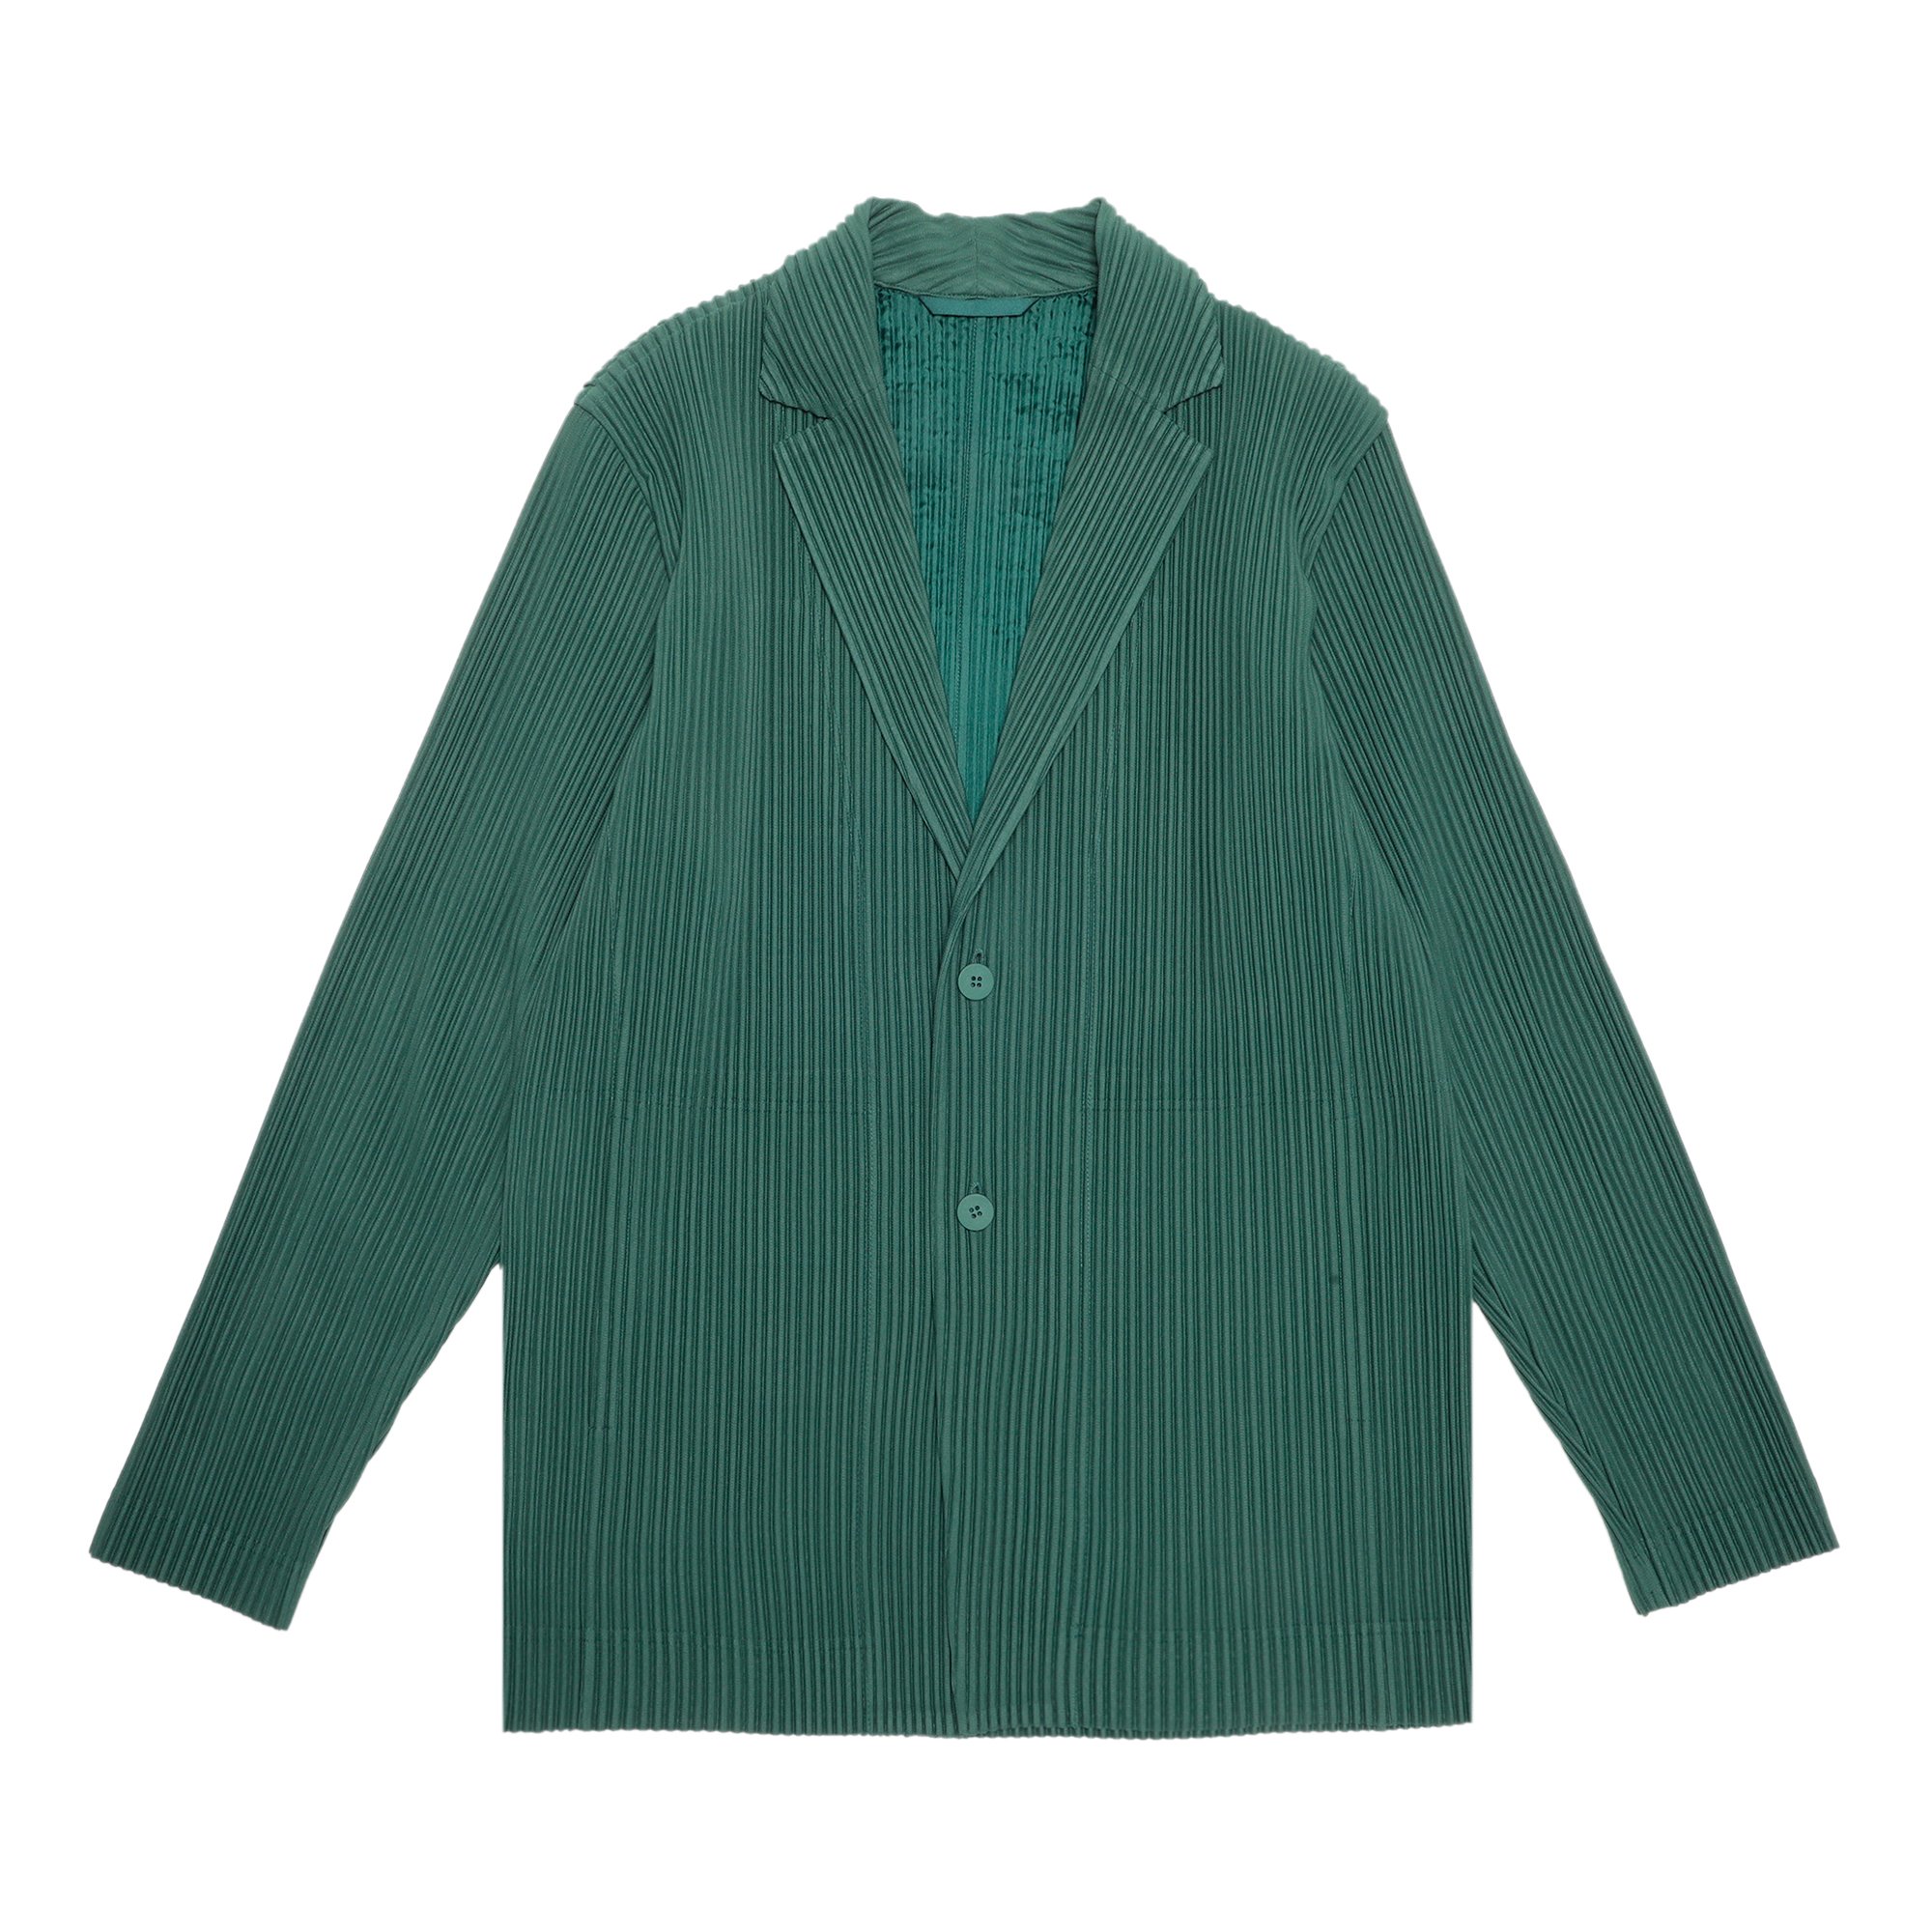 Homme Plissé Issey Miyake Pleated Button Down Jacket 'Green' | GOAT